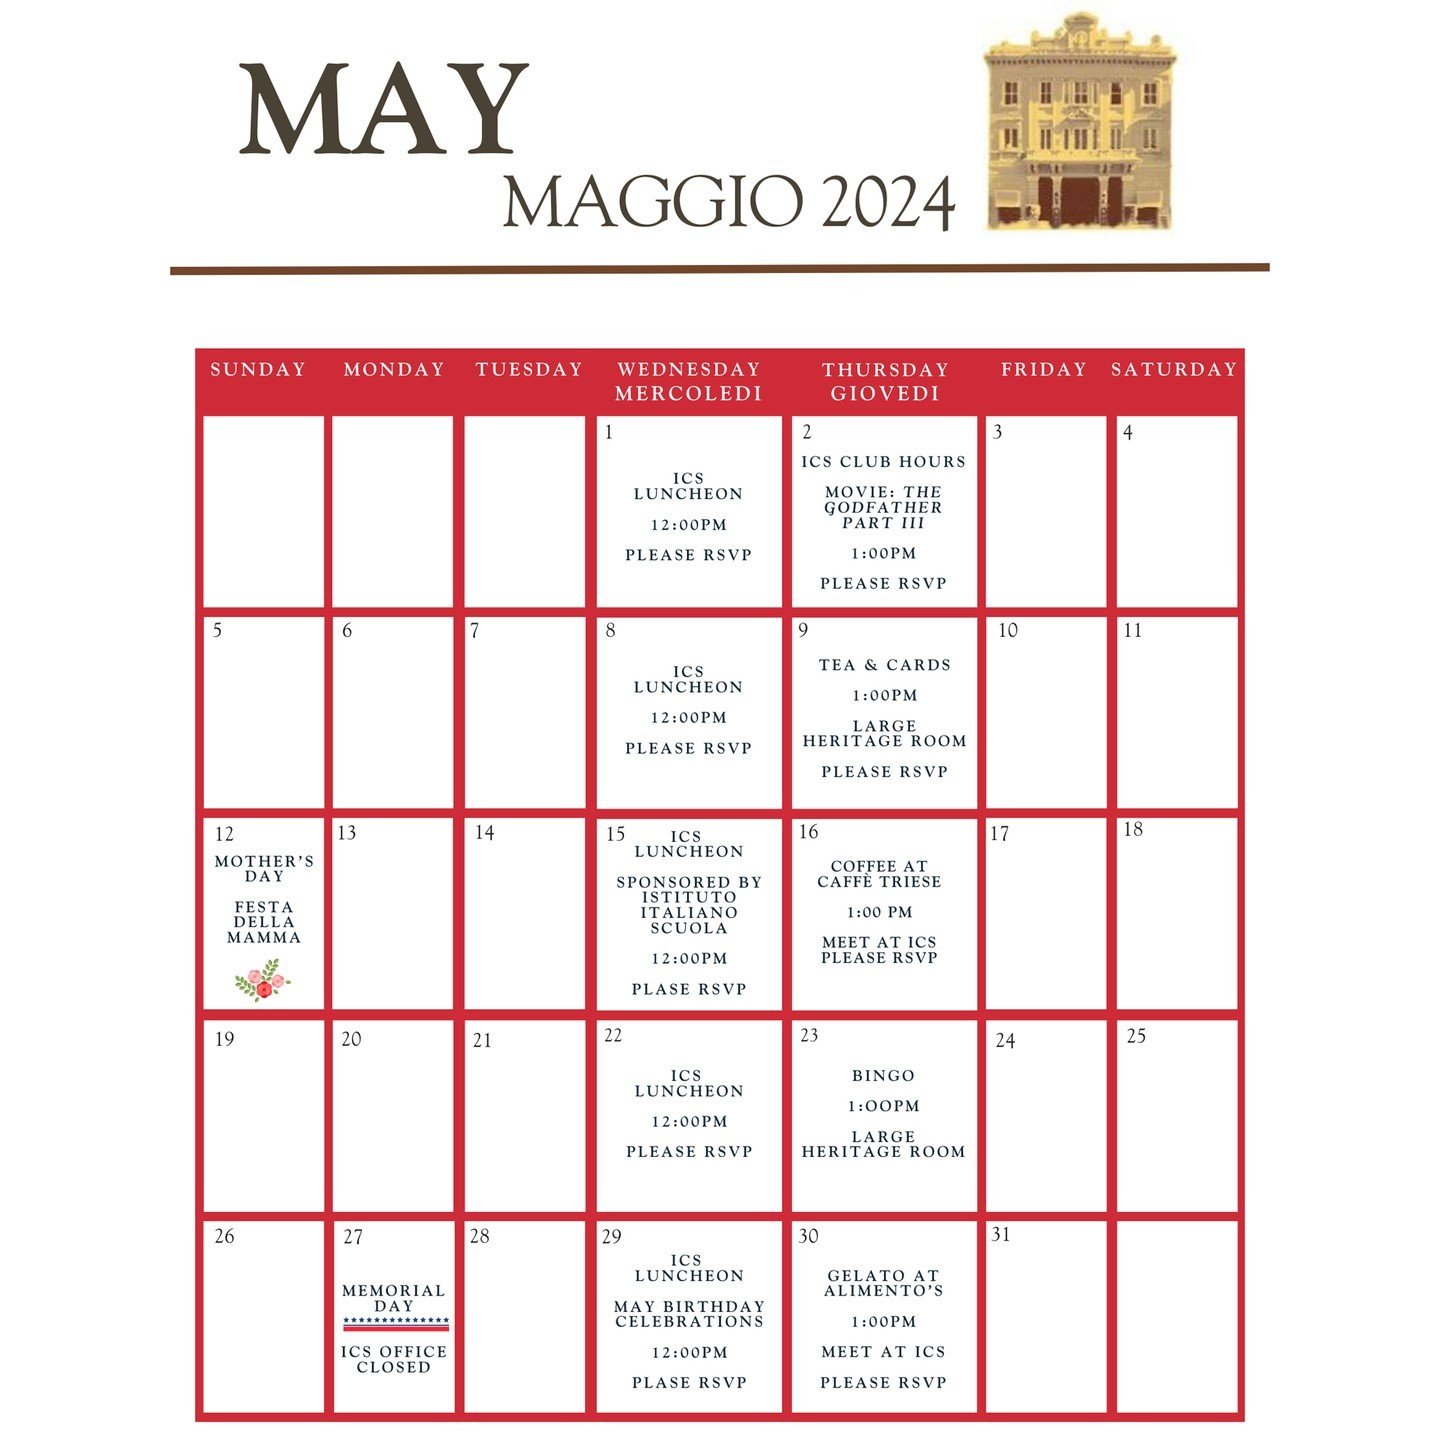 Discover all our upcoming events in May in the attached calendar. Join us for one of our Wednesday lunches, or enjoy an ice cream or coffee in North Beach, or stop by our booth at the fabulous Festa Italiana on June 1st.
To participate in our activit